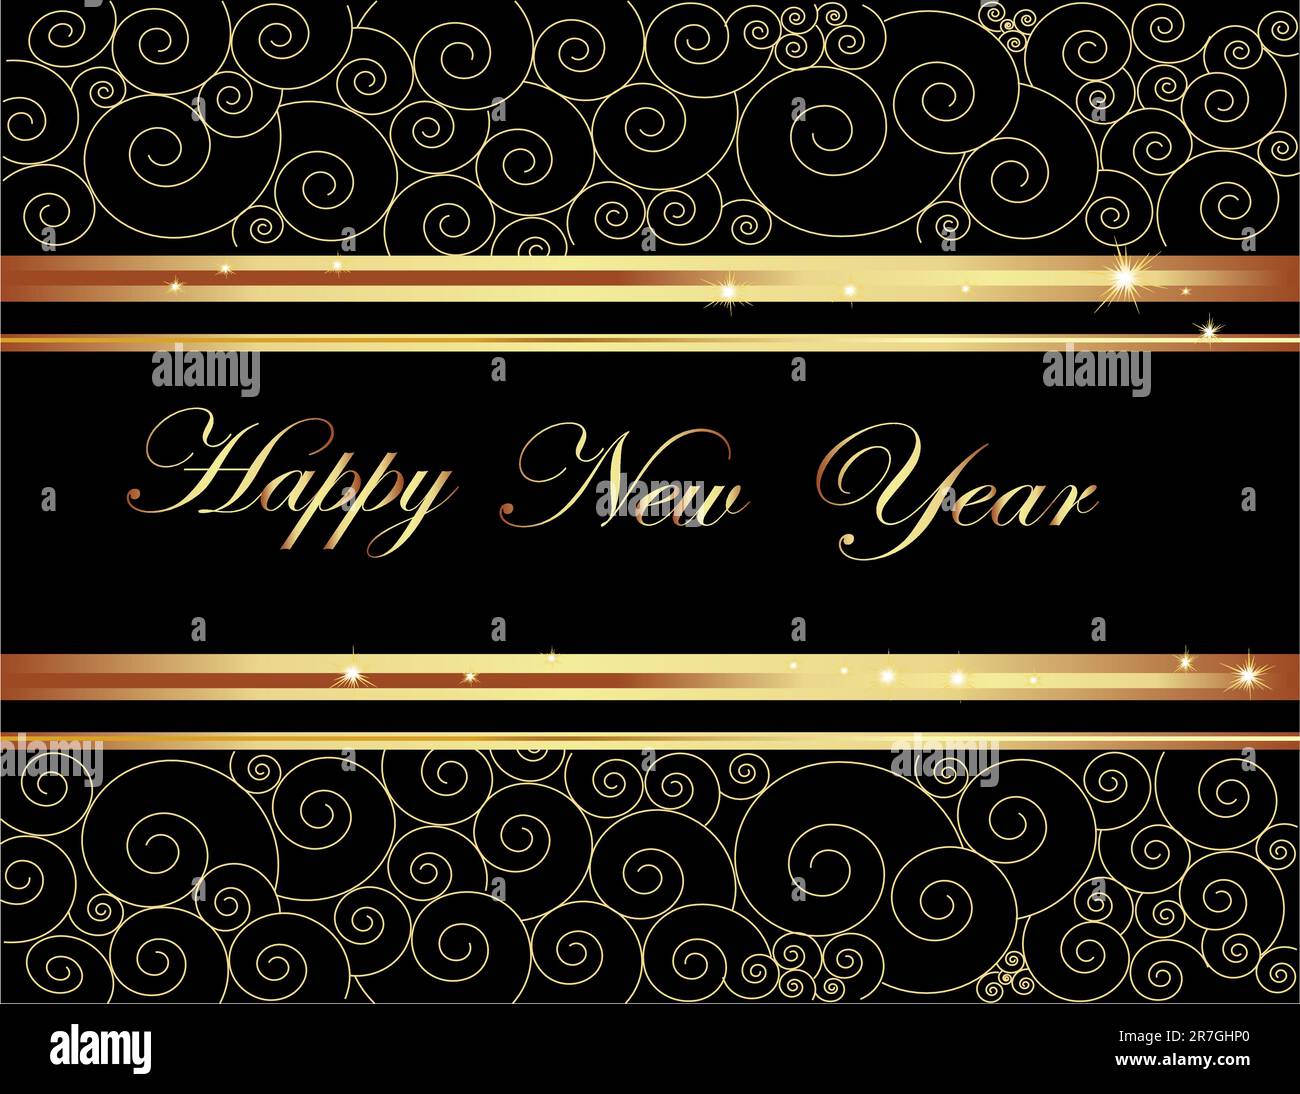 Happy New Year 2011 background gold and black Stock Vector